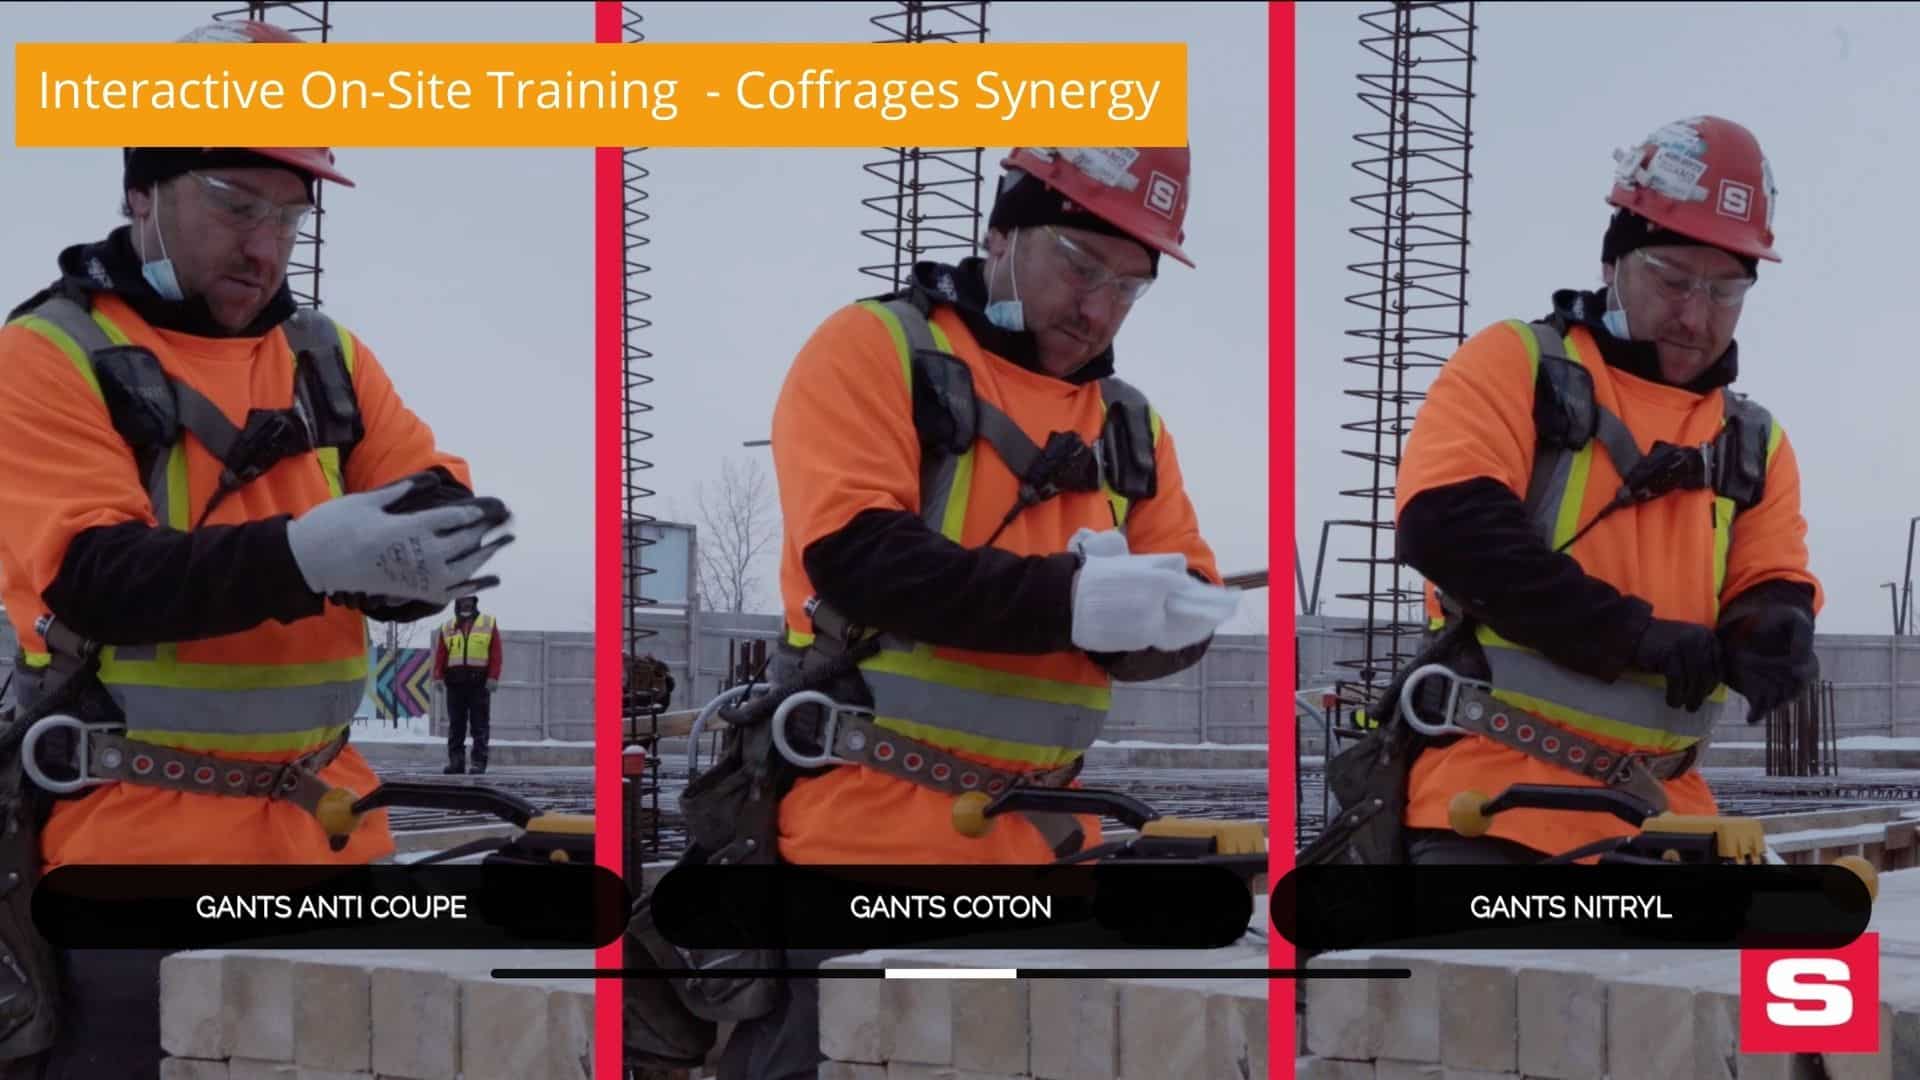 Still frame from Interactive On Site Training Video - showing a man using different tools. The same man is pictured three times, each with a different tool